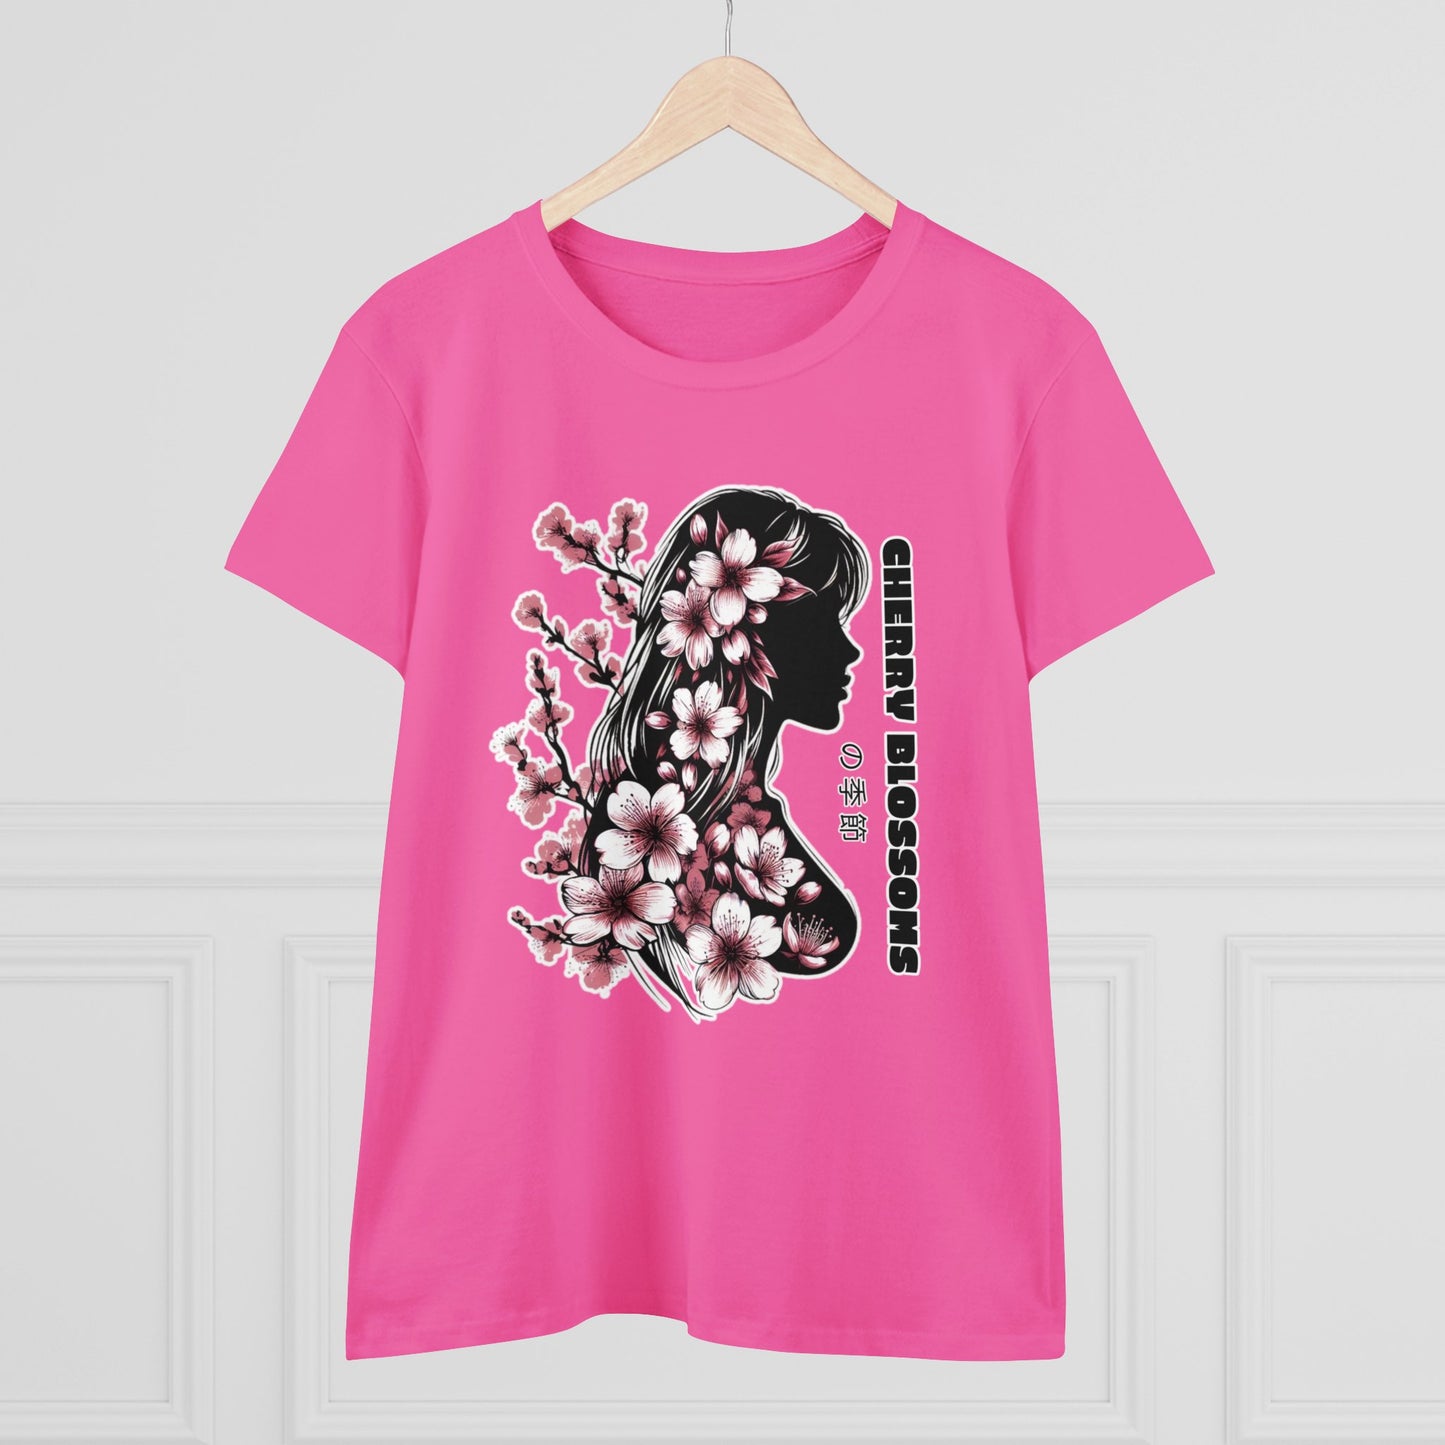 Blossoming Dreams: Dance of Cherry Petals Midweight Cotton Tee